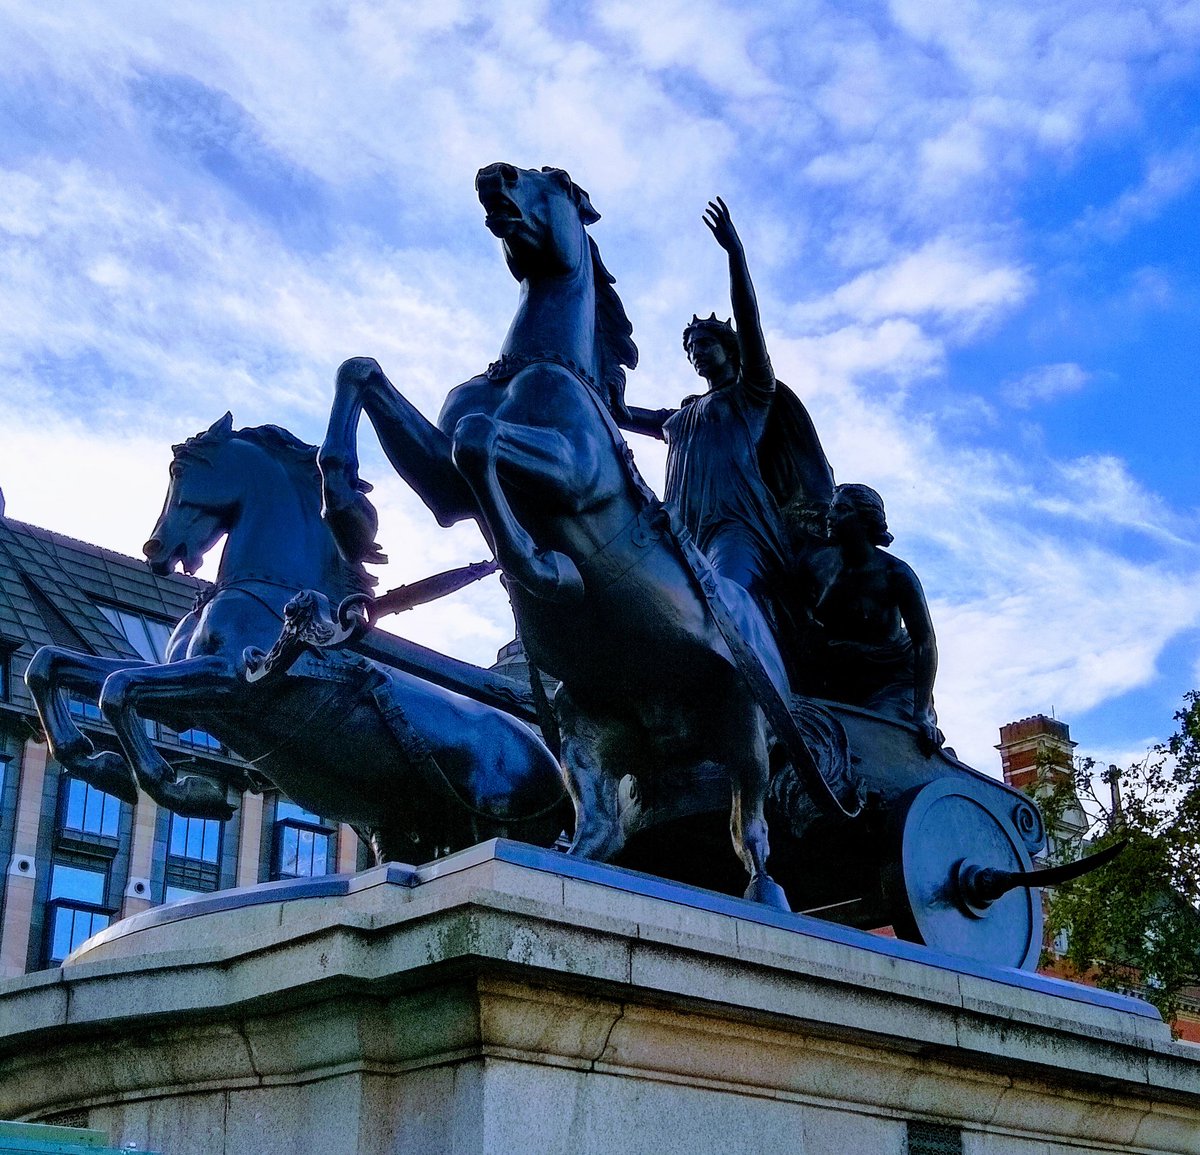 Thomas Thornycroft worked on this sculpture - called "Boadicea And Her Daughters" from 1856 until shortly before his death in 1885, and his son continued the work. It was not erected in its current position until 1902.  #womenstatues